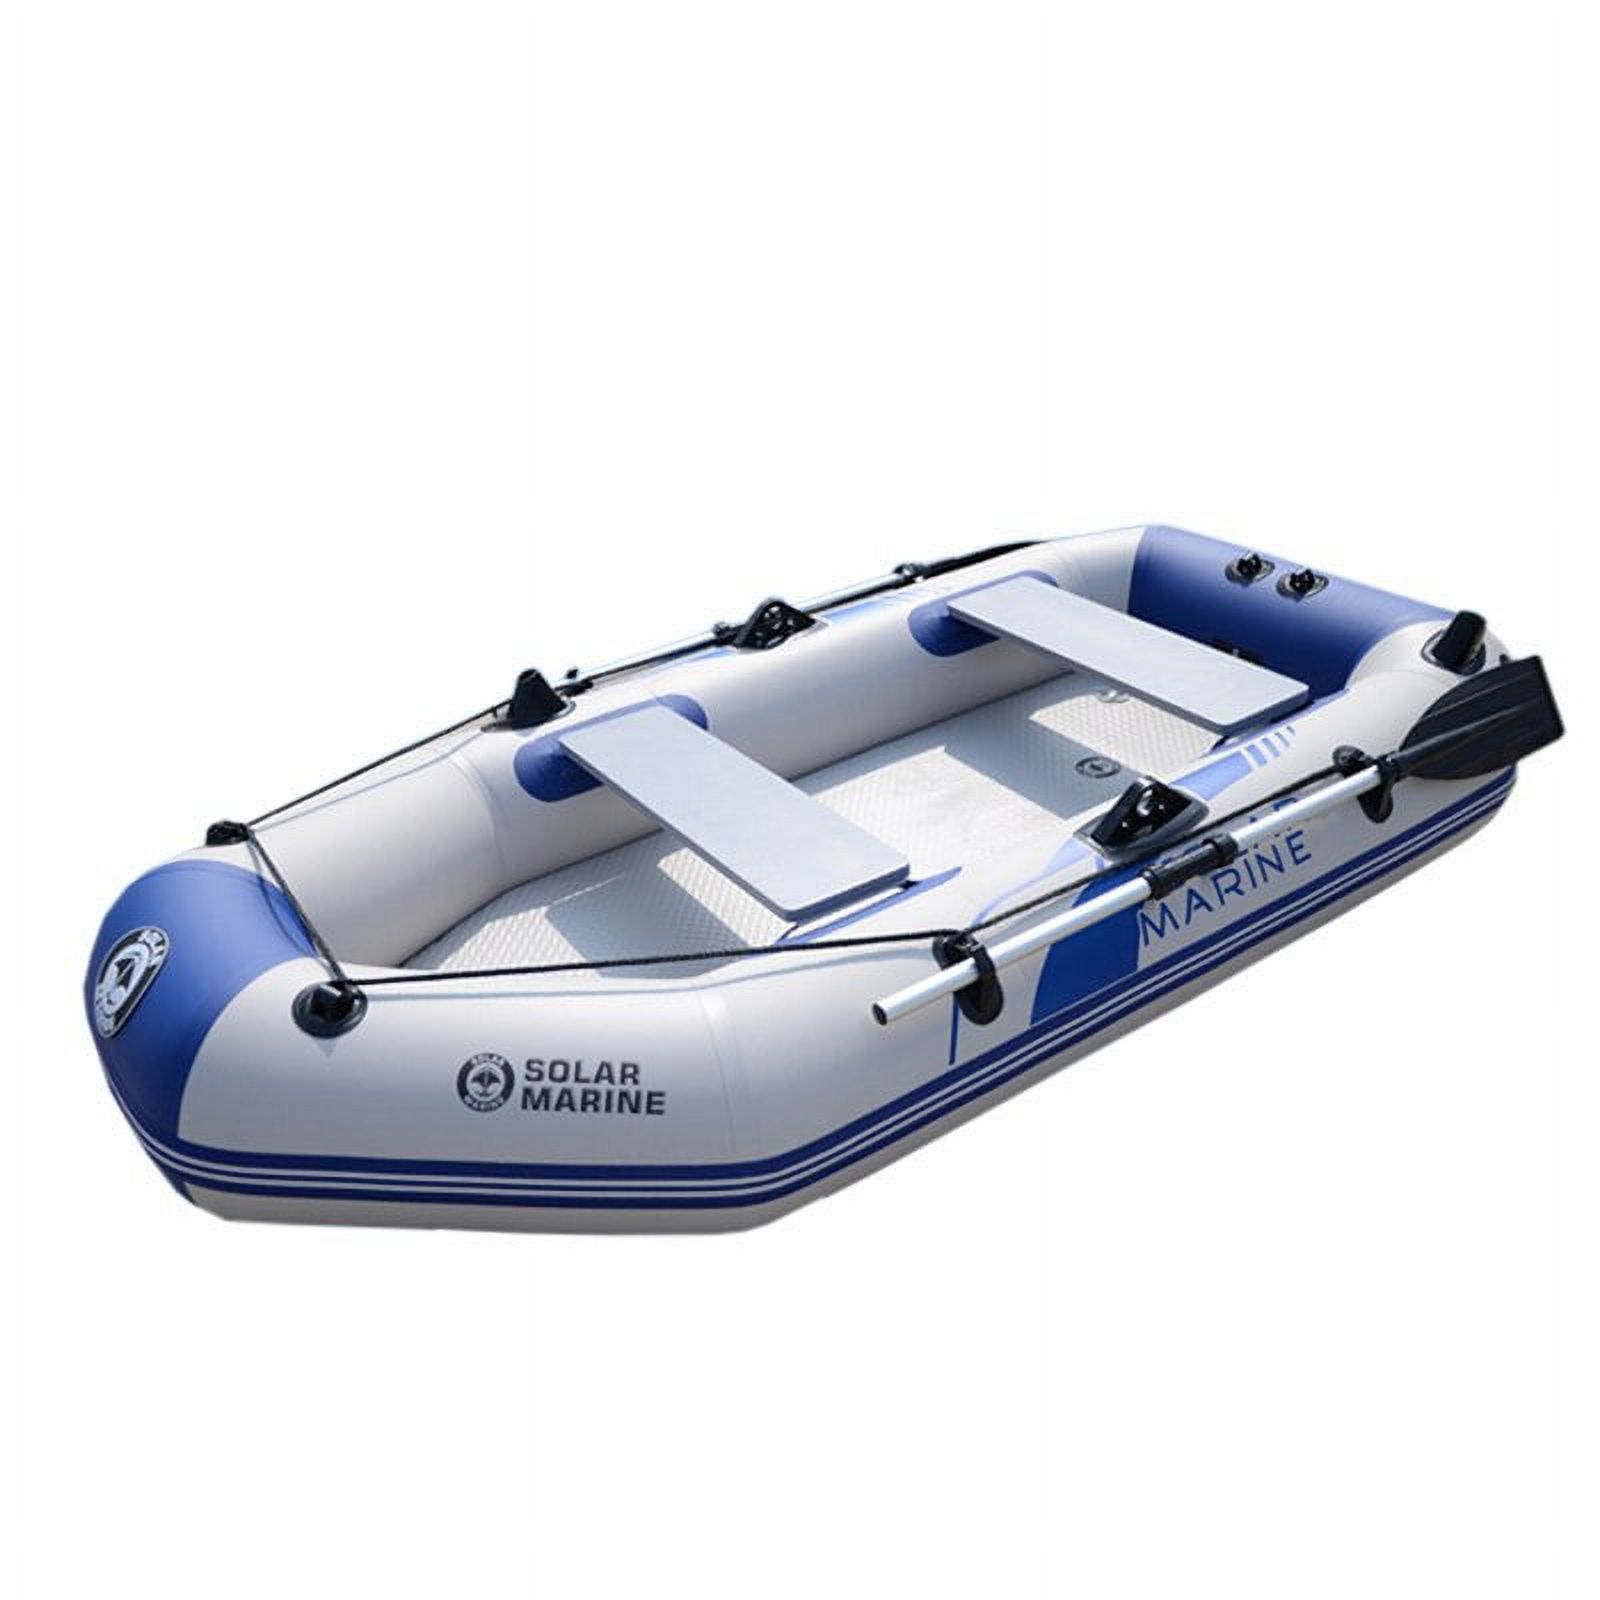 2.6 M 3 Person PVC Portable Inflatable Boat Fishing Kayak Canoe Dinghy Set with Accessories Water Sports - image 5 of 6